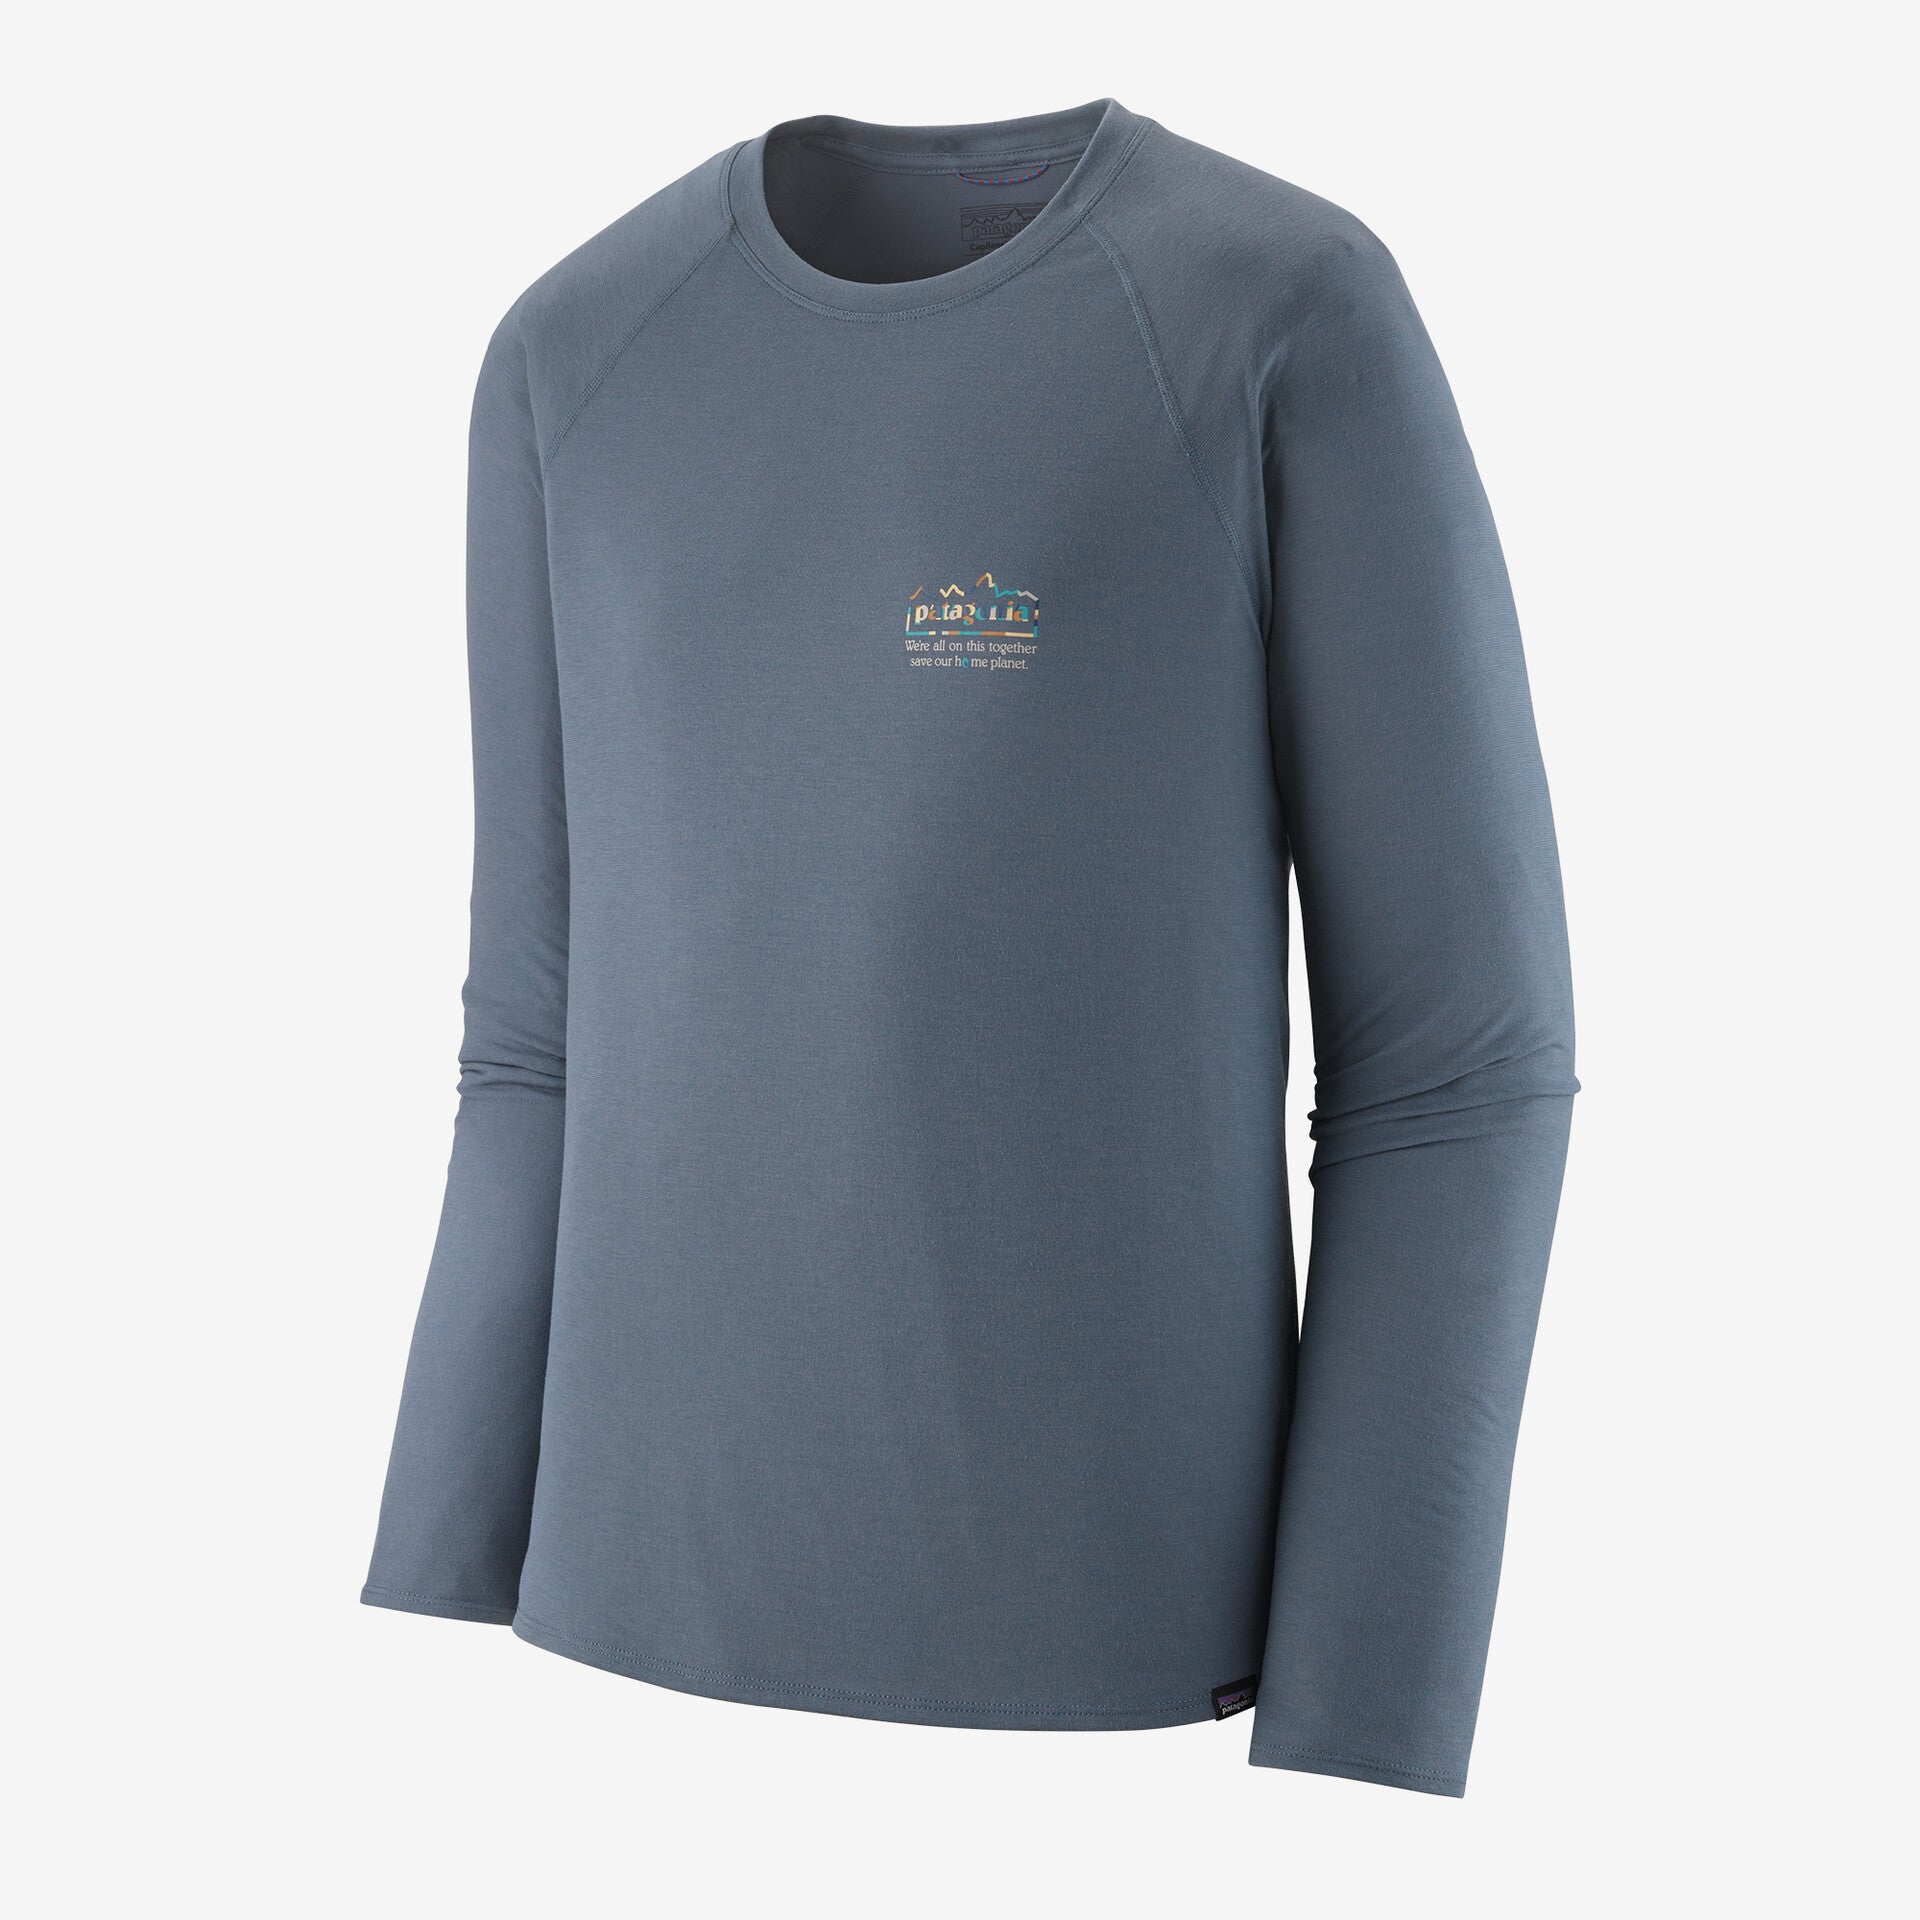 PATAGONIA Long-Sleeved Capilene® Cool Trail Graphic Shirt - Men's